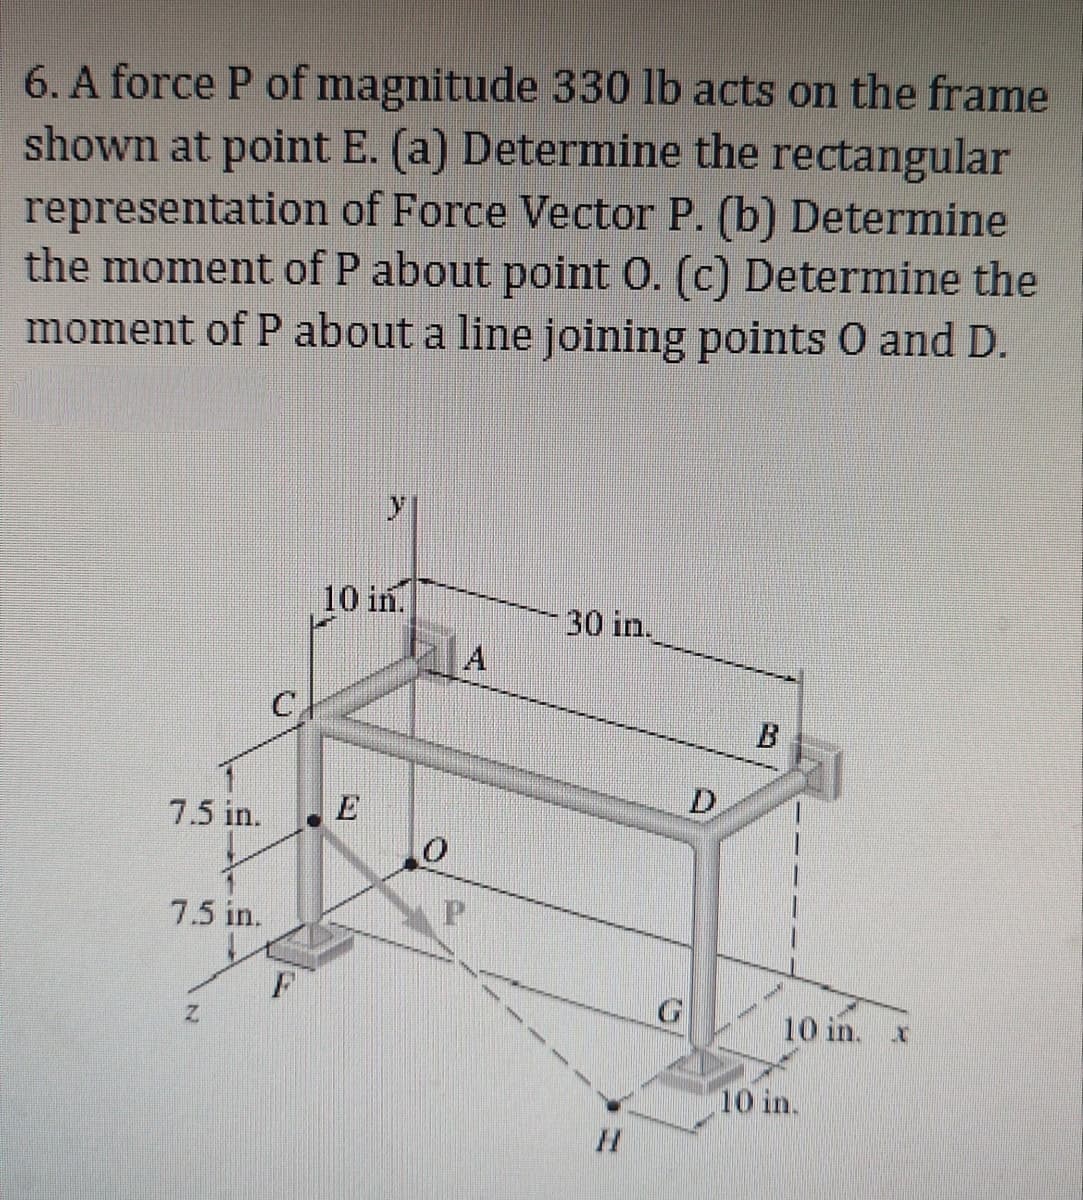 6. A force P of magnitude 330 lb acts on the frame
shown at point E. (a) Determine the rectangular
representation of Force Vector P. (b) Determine
the moment of P about point O. (c) Determine the
moment of P about a line joining points O and D.
7.5 in.
7.5 in.
Z
C
10 in.
0
A
30 in.
G
D
10 in. x
10 in.